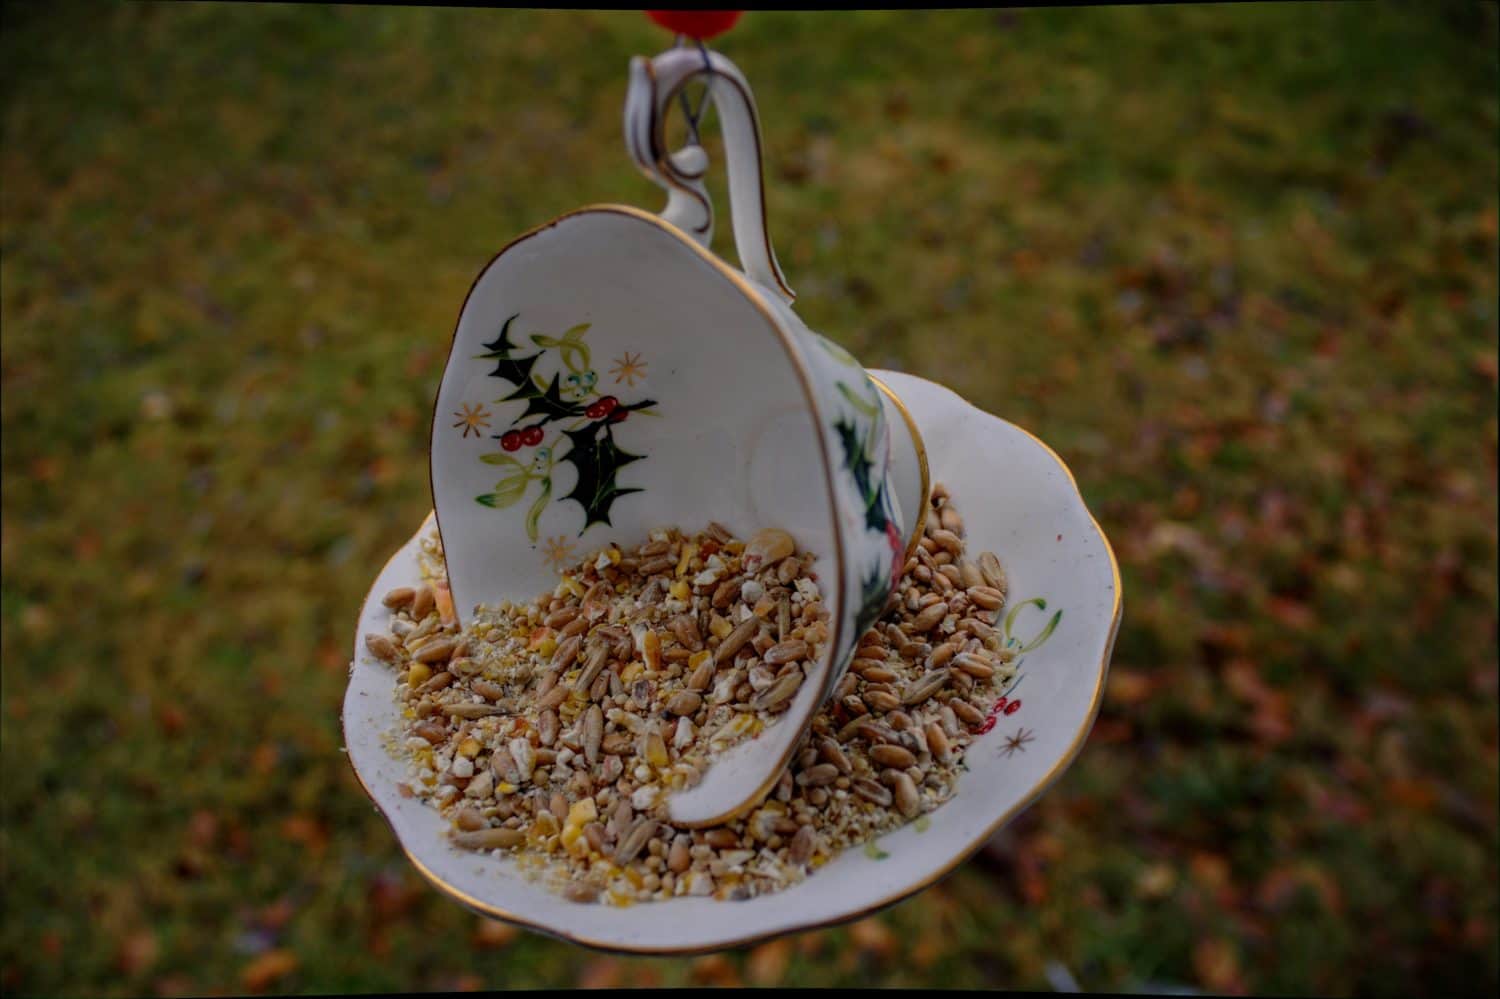 A pretty tea cup bird feeder with holly pattern hanging and viewed from above full of bird seed.